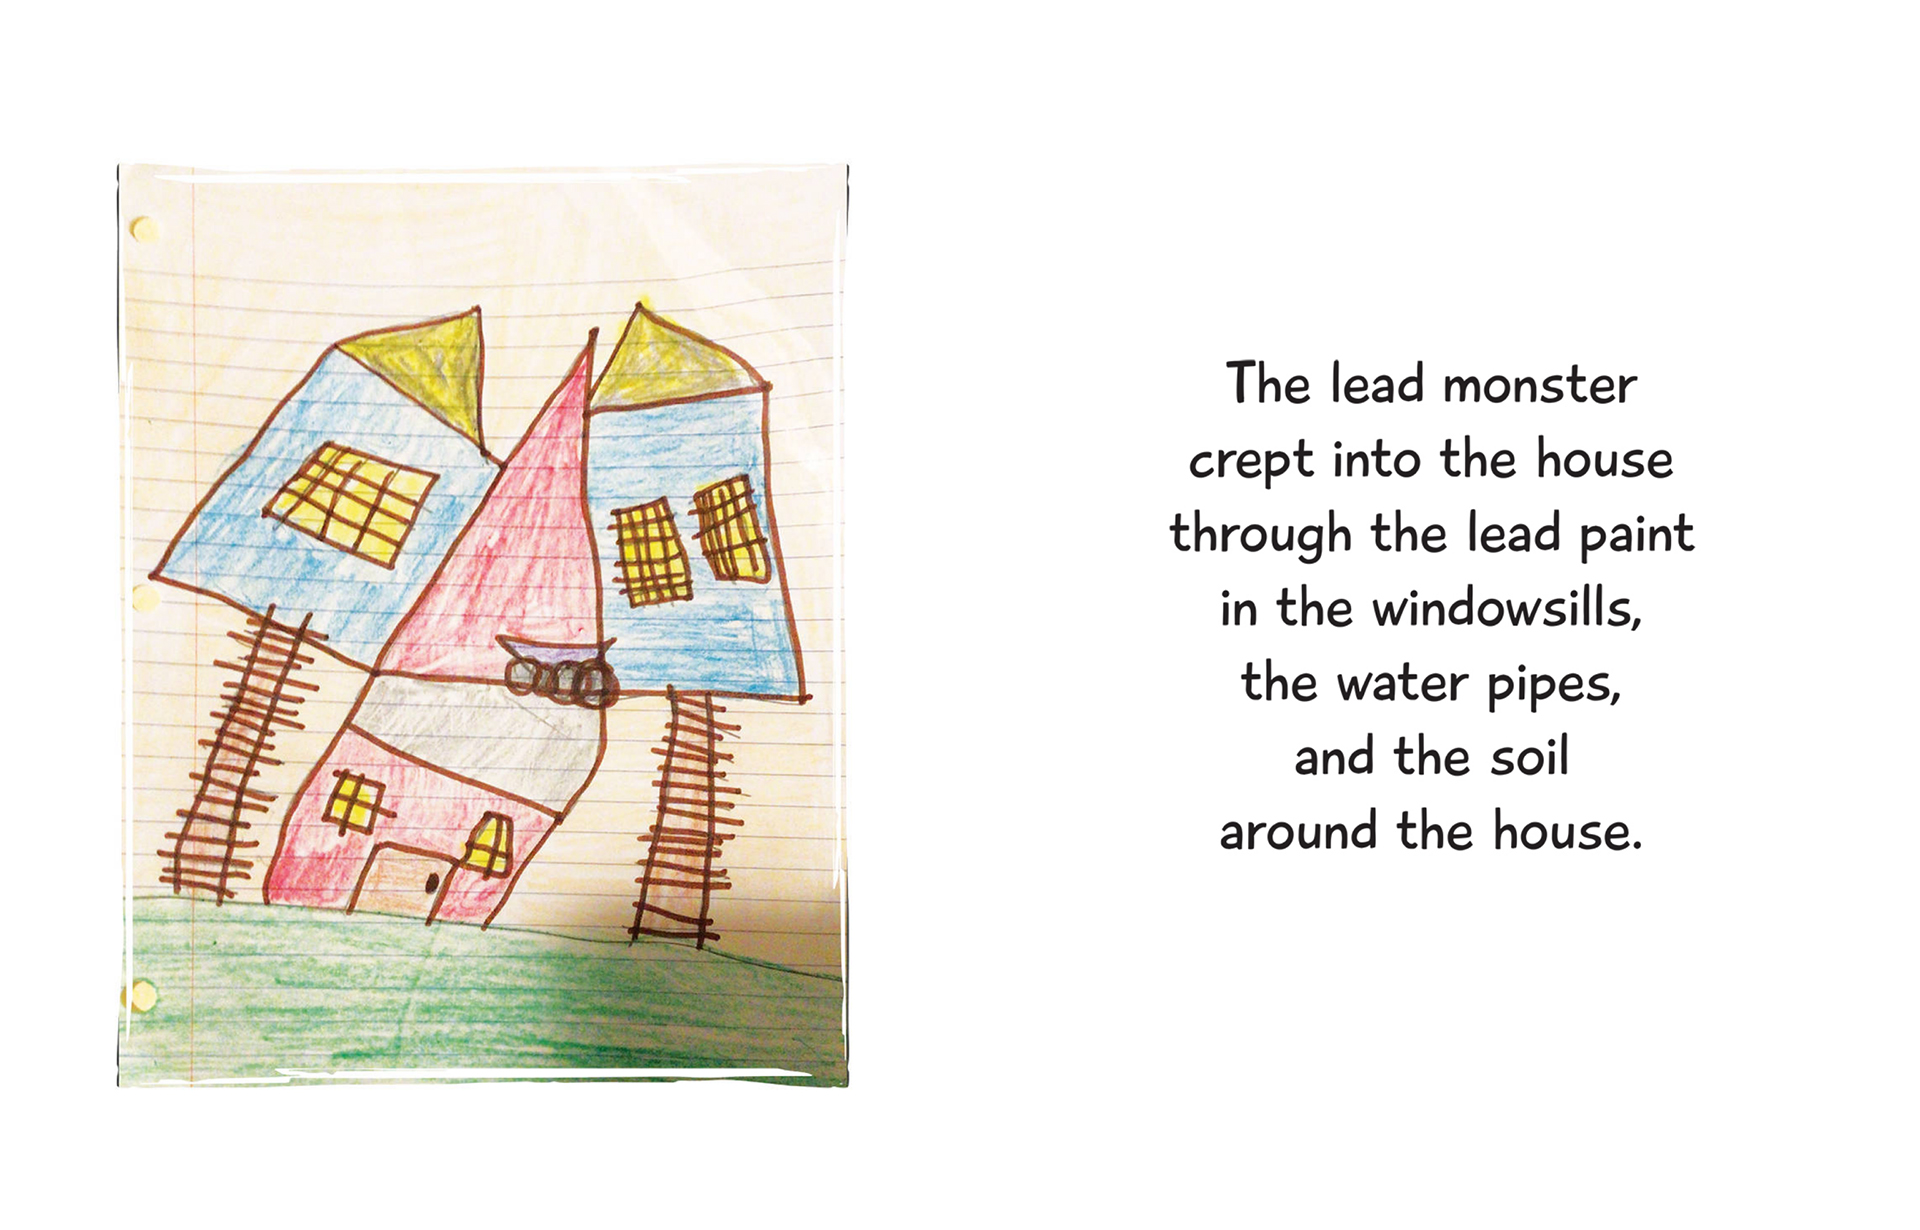 A book from a page shows an illustration on ruled paper alongside the text "The lead monster crept into the house through the lead paint in the windowsills, the water pipes, and the soil around the house."